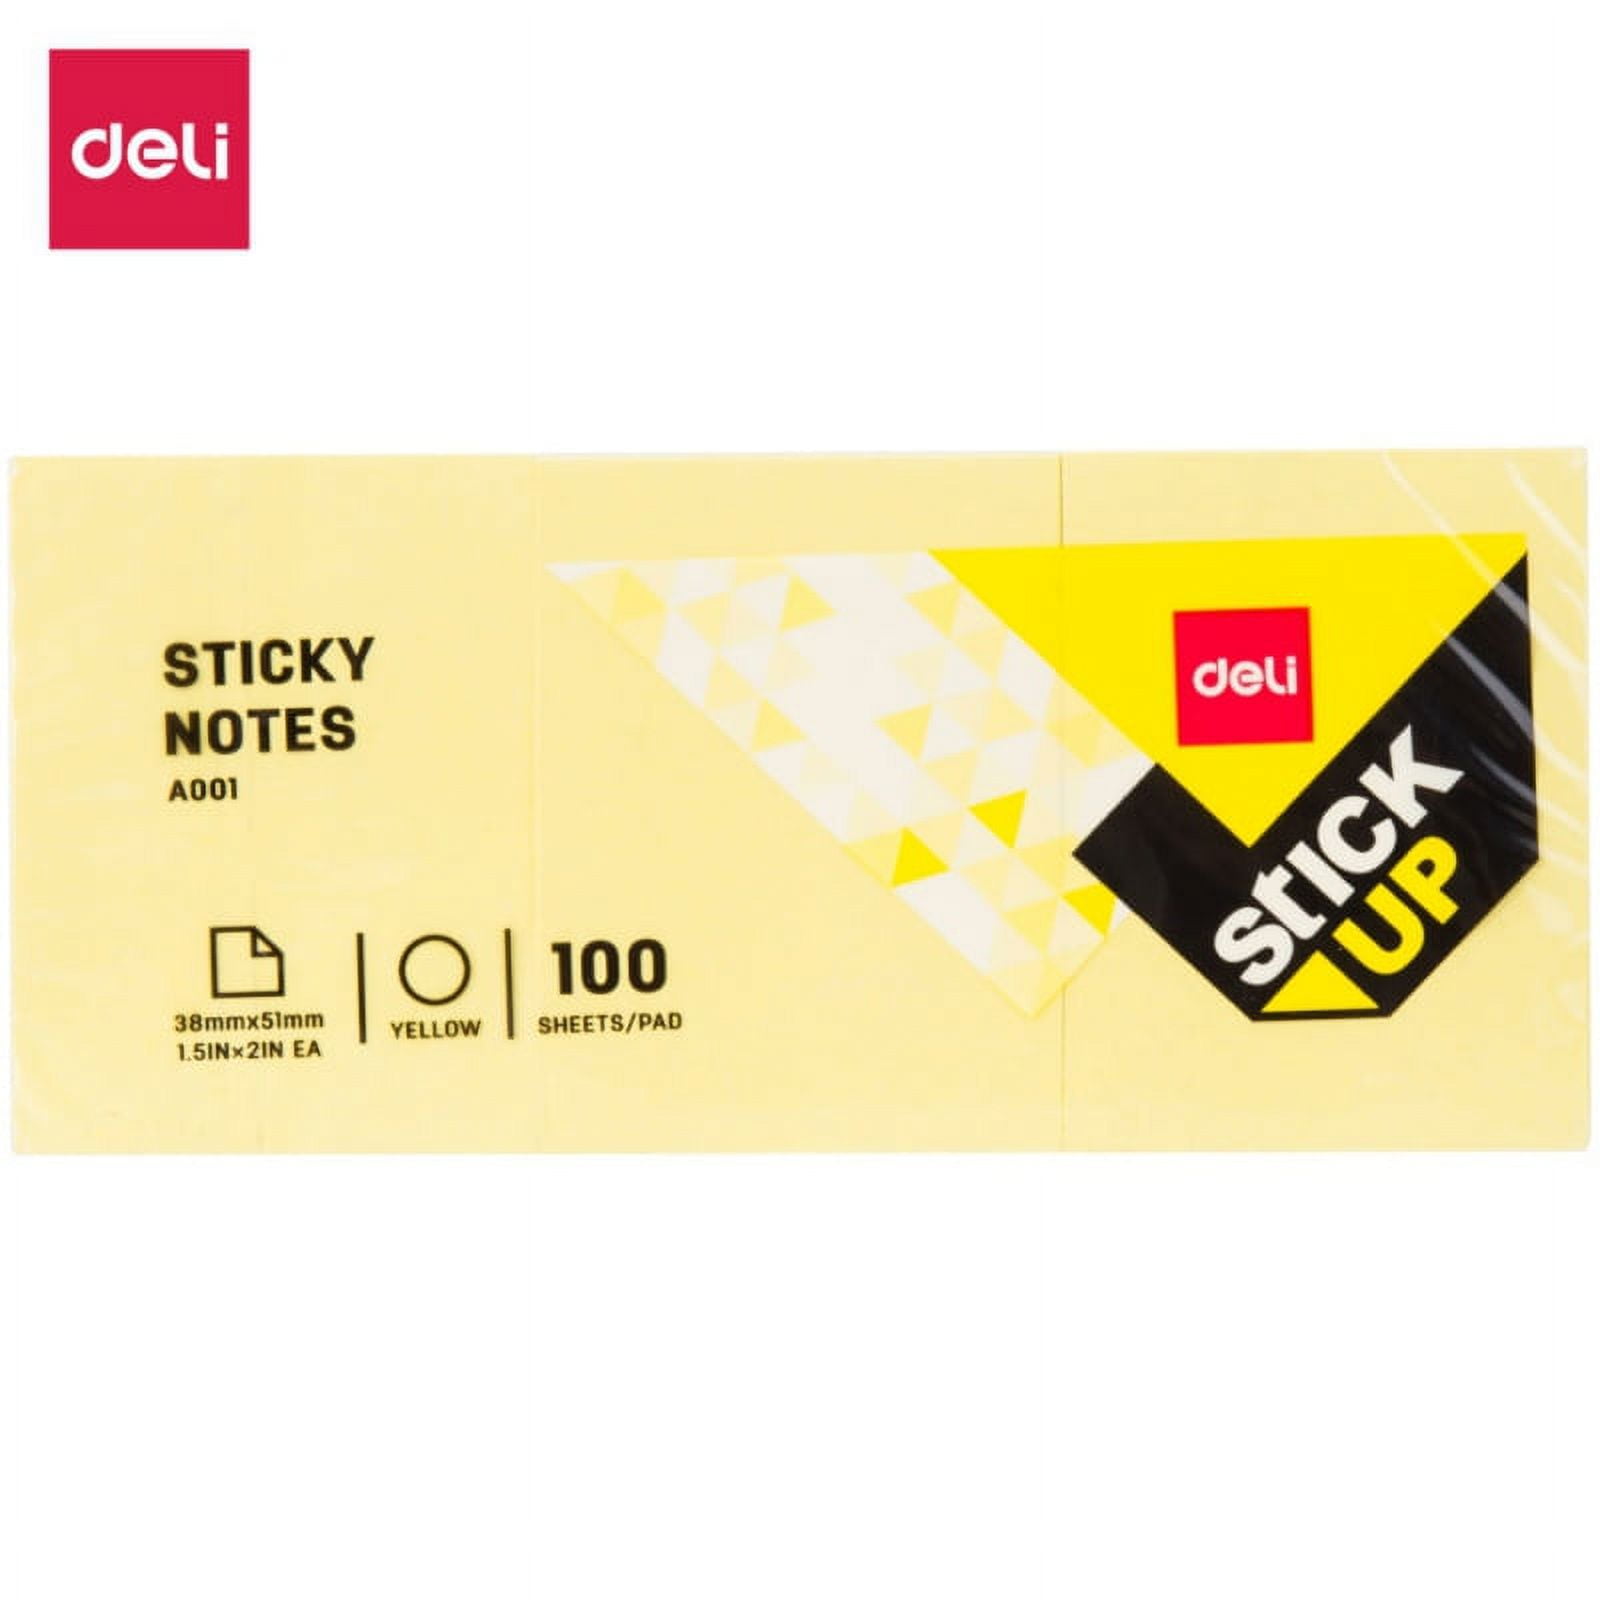  Post-it Mini Notes, 1.5 in x 2 in, 24 Pads, America #1  Favorite Sticky Notes, Canary Yellow, Clean Removal, Recyclable  (653-24VAD-B) : Sticky Note Pads : Office Products